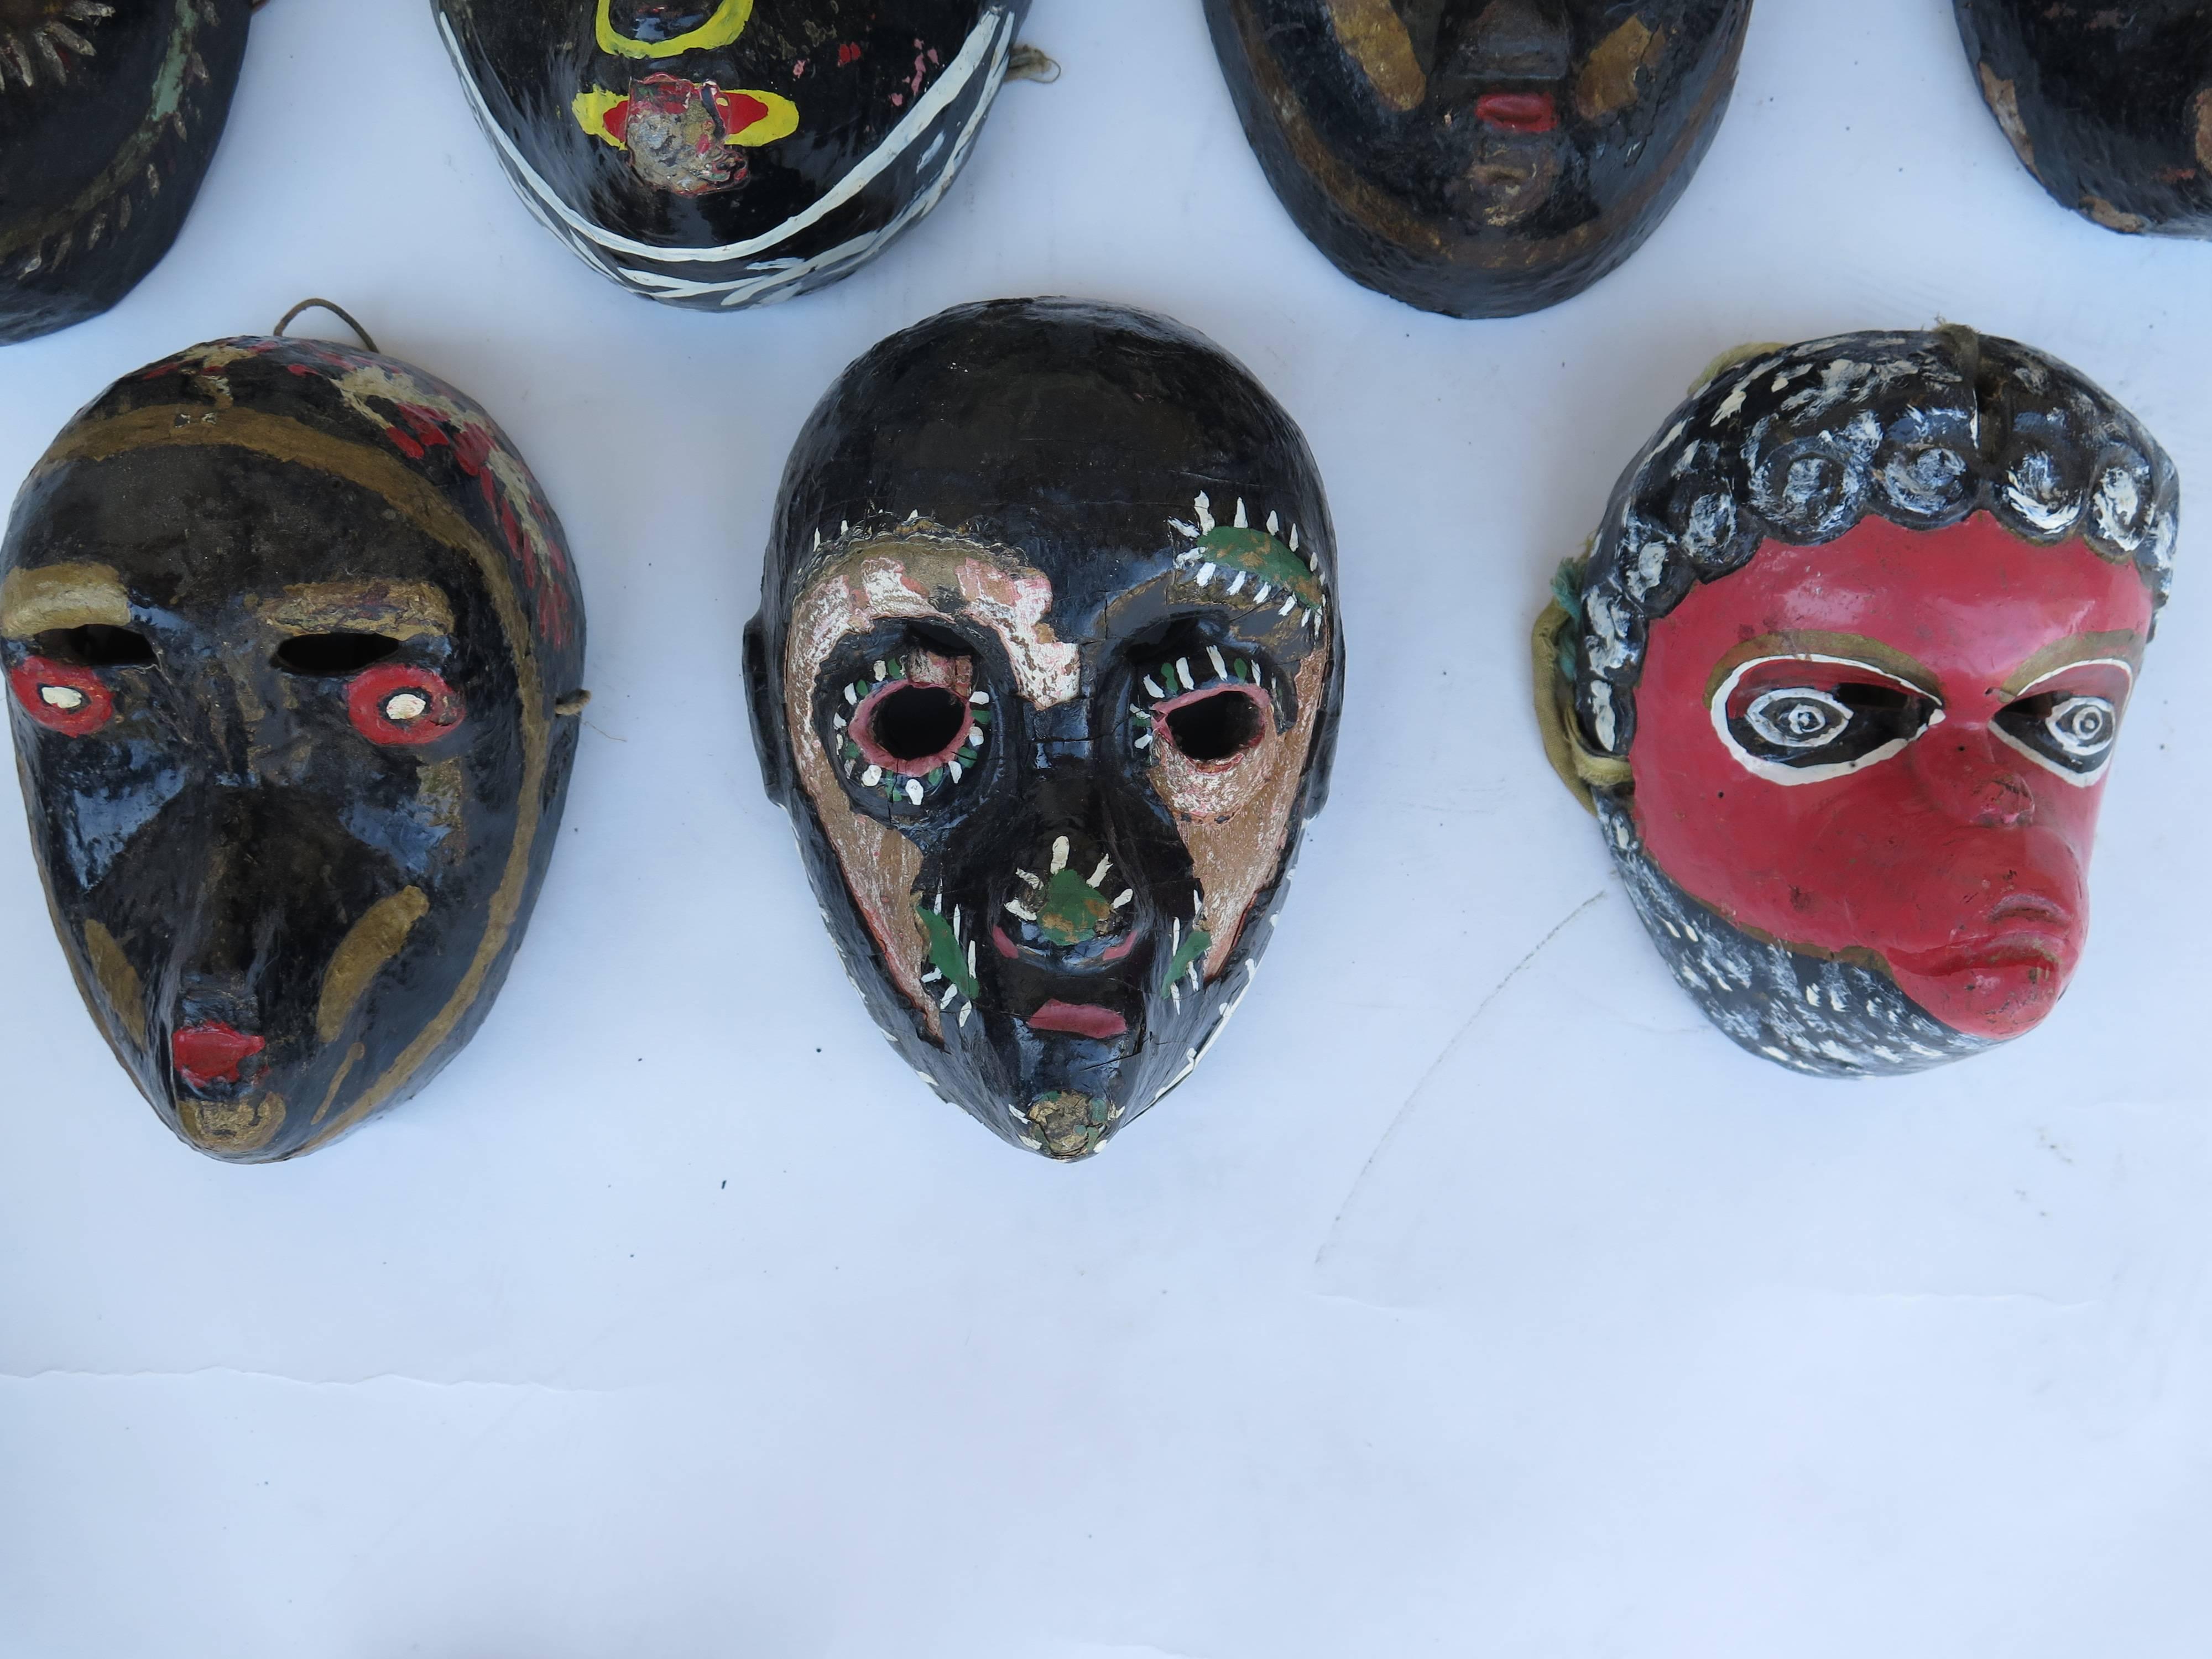 Collection of early 20th century Guatemalan 'mico' and 'monkey' masks - used in the 'Costeño' and 'Baile de los Animales' Dances, circa 1930s and 1940s.
These were all part of the Gordon Frost Collection. Frost wrote and documented the masks in